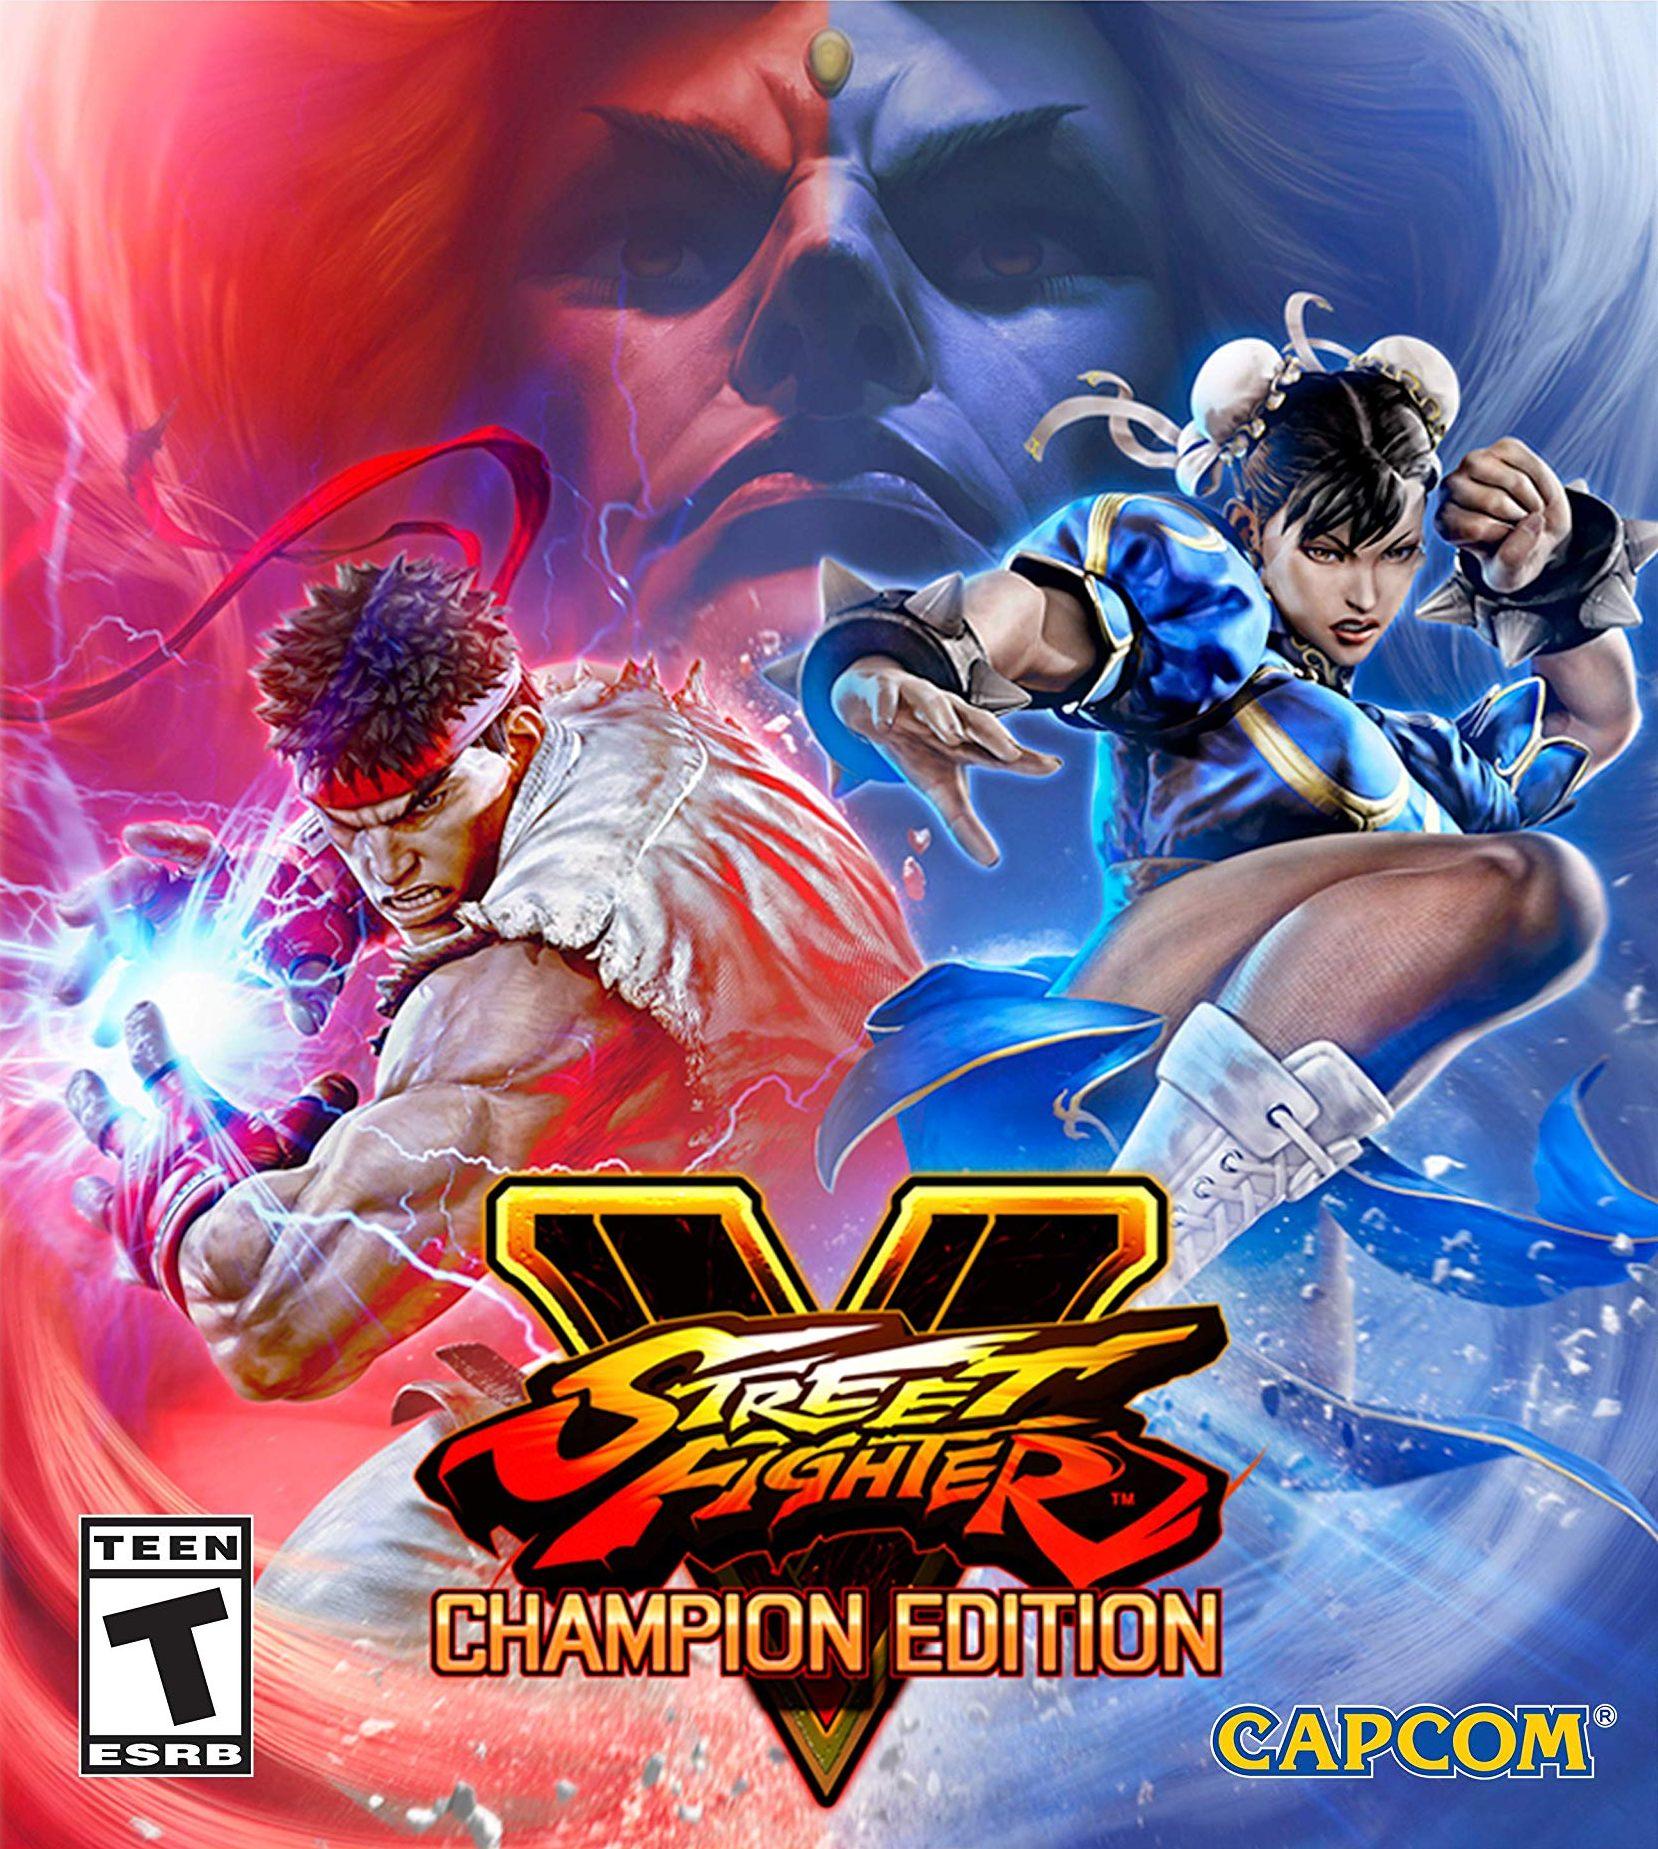 Street Fighter V Champion Edition Wallpapers Wallpaper Cave